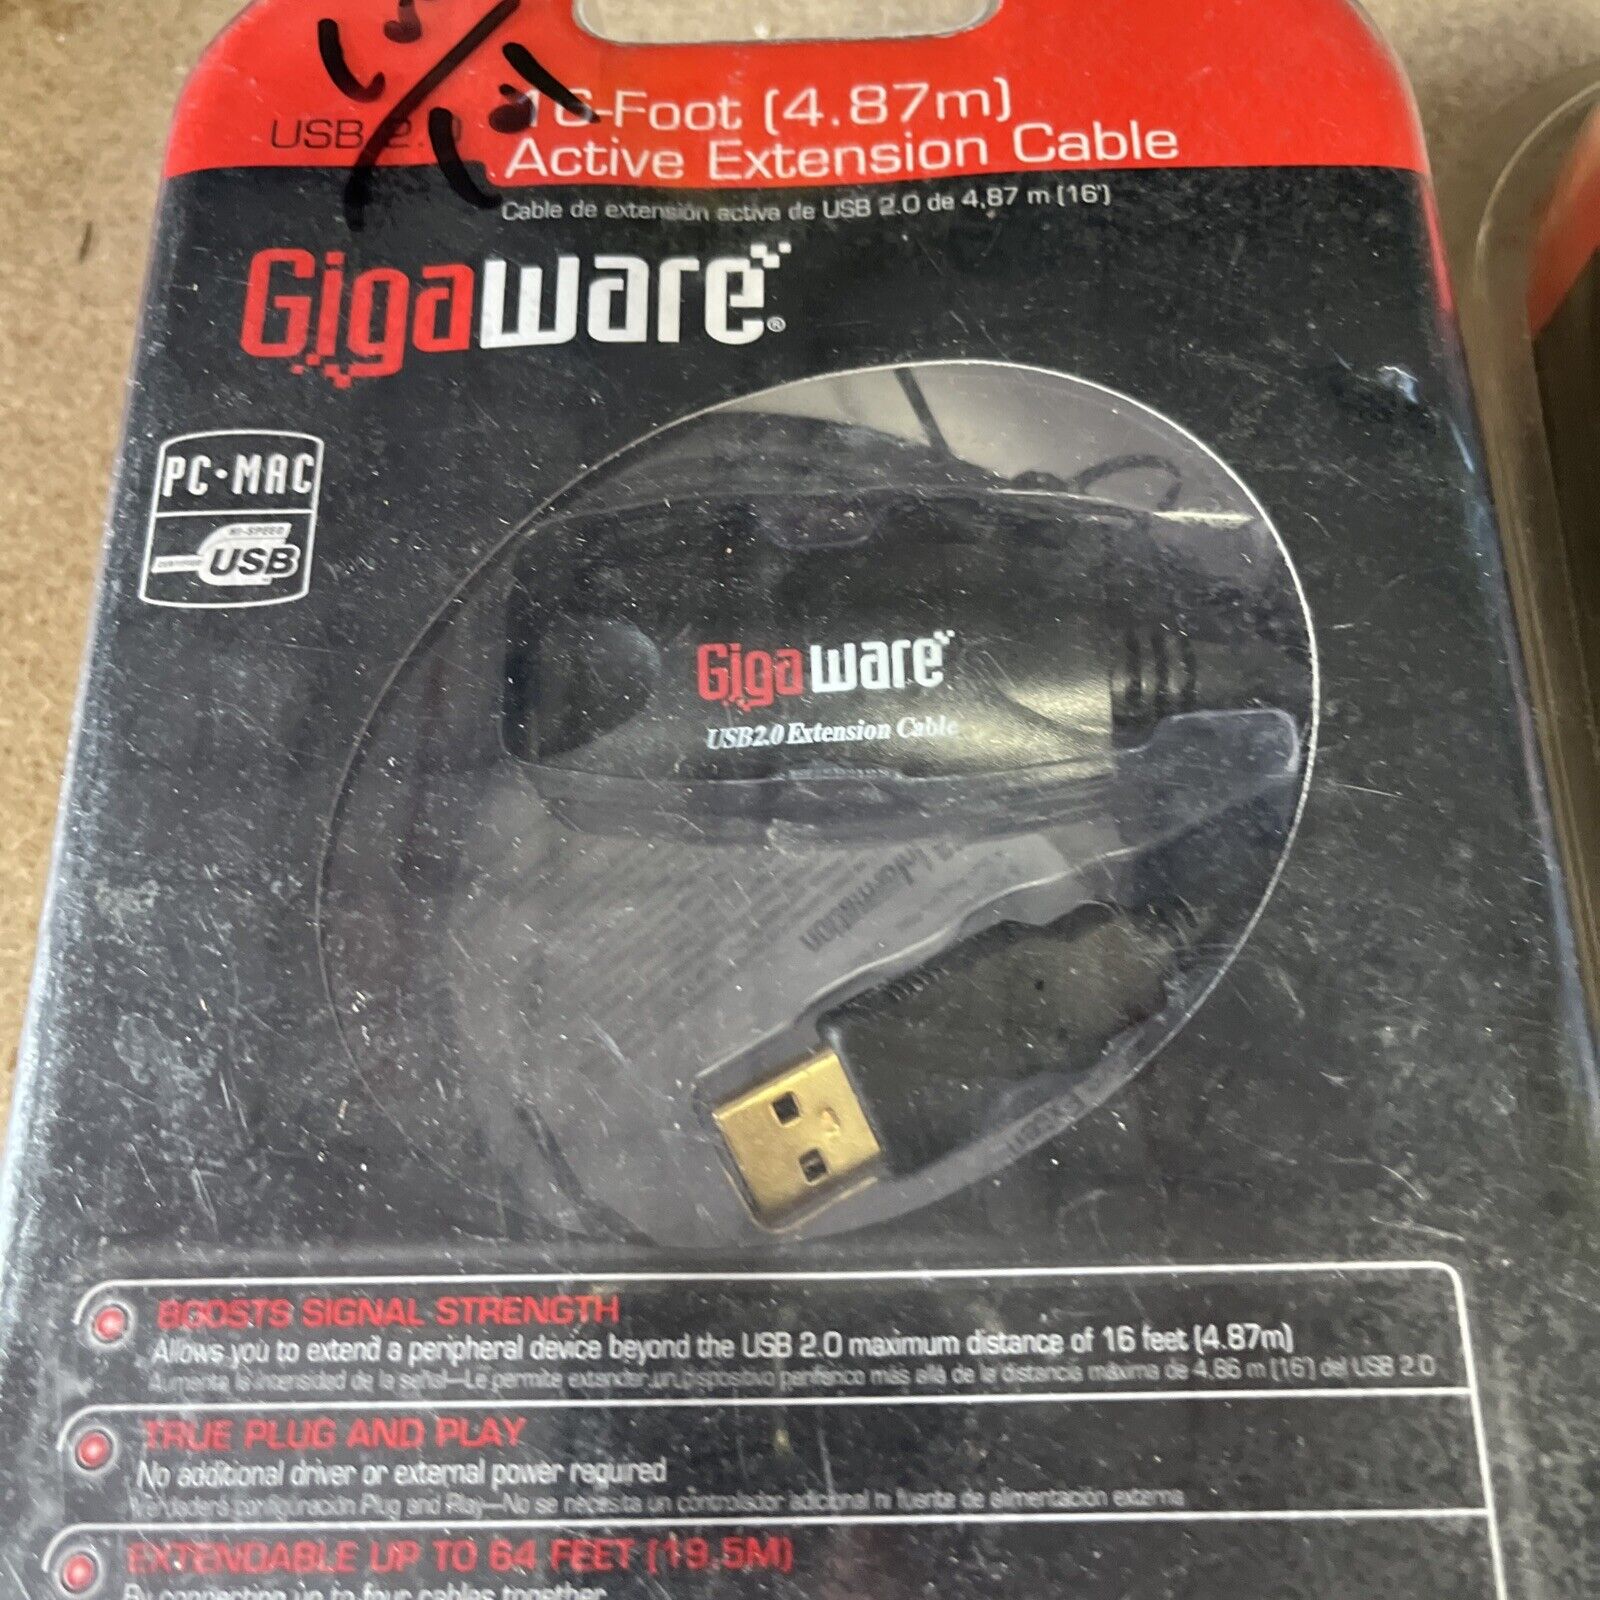 Gigaware USB 2.0 16-Ft Active Extension Cable Gold Plated Connector Lot Of 2